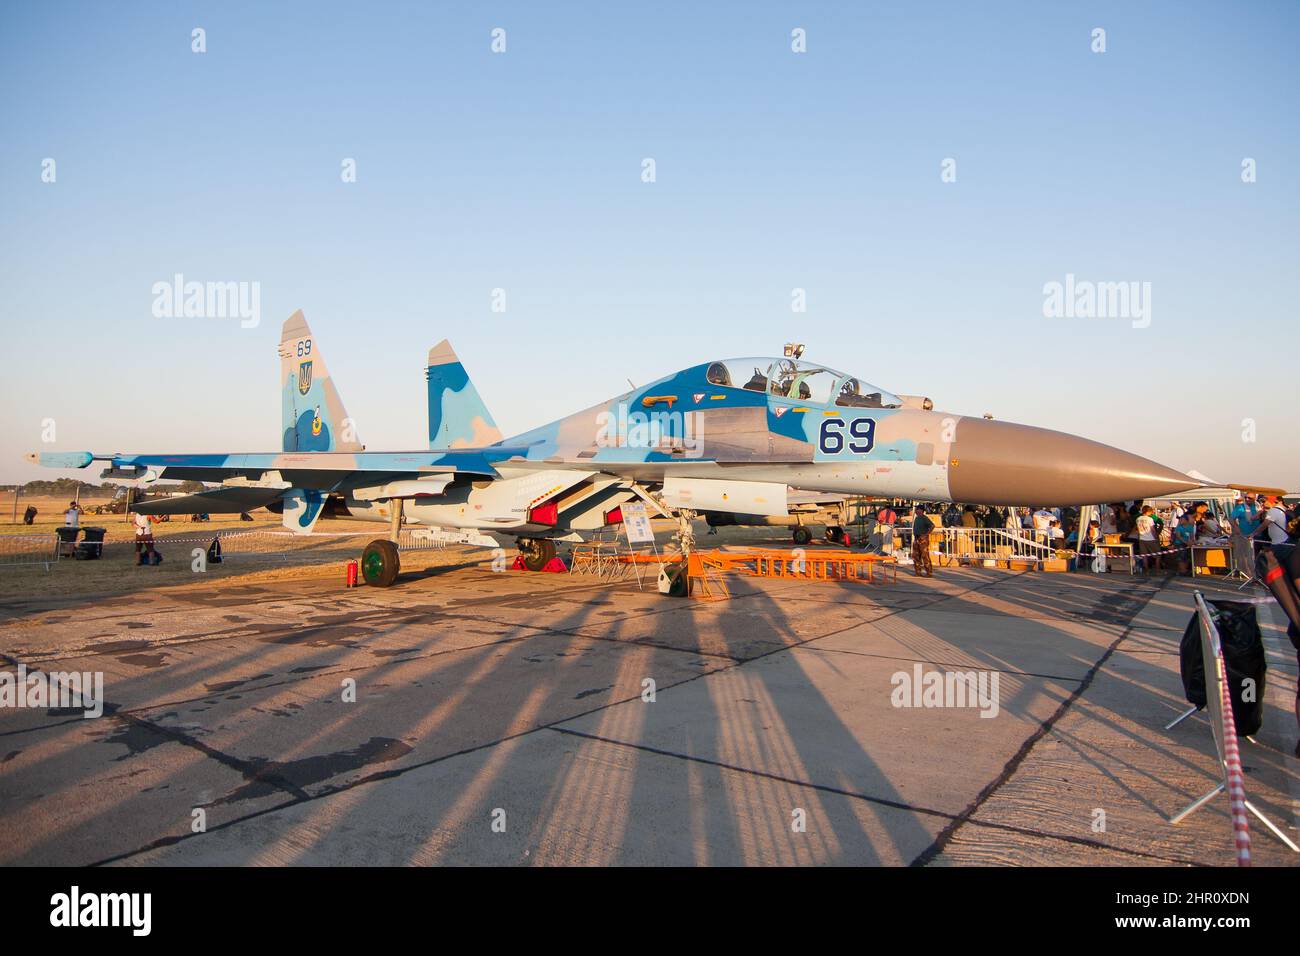 Ukrainian Air Force Sukhoi SU-27 military fighter jet on the ground at an airshow Stock Photo